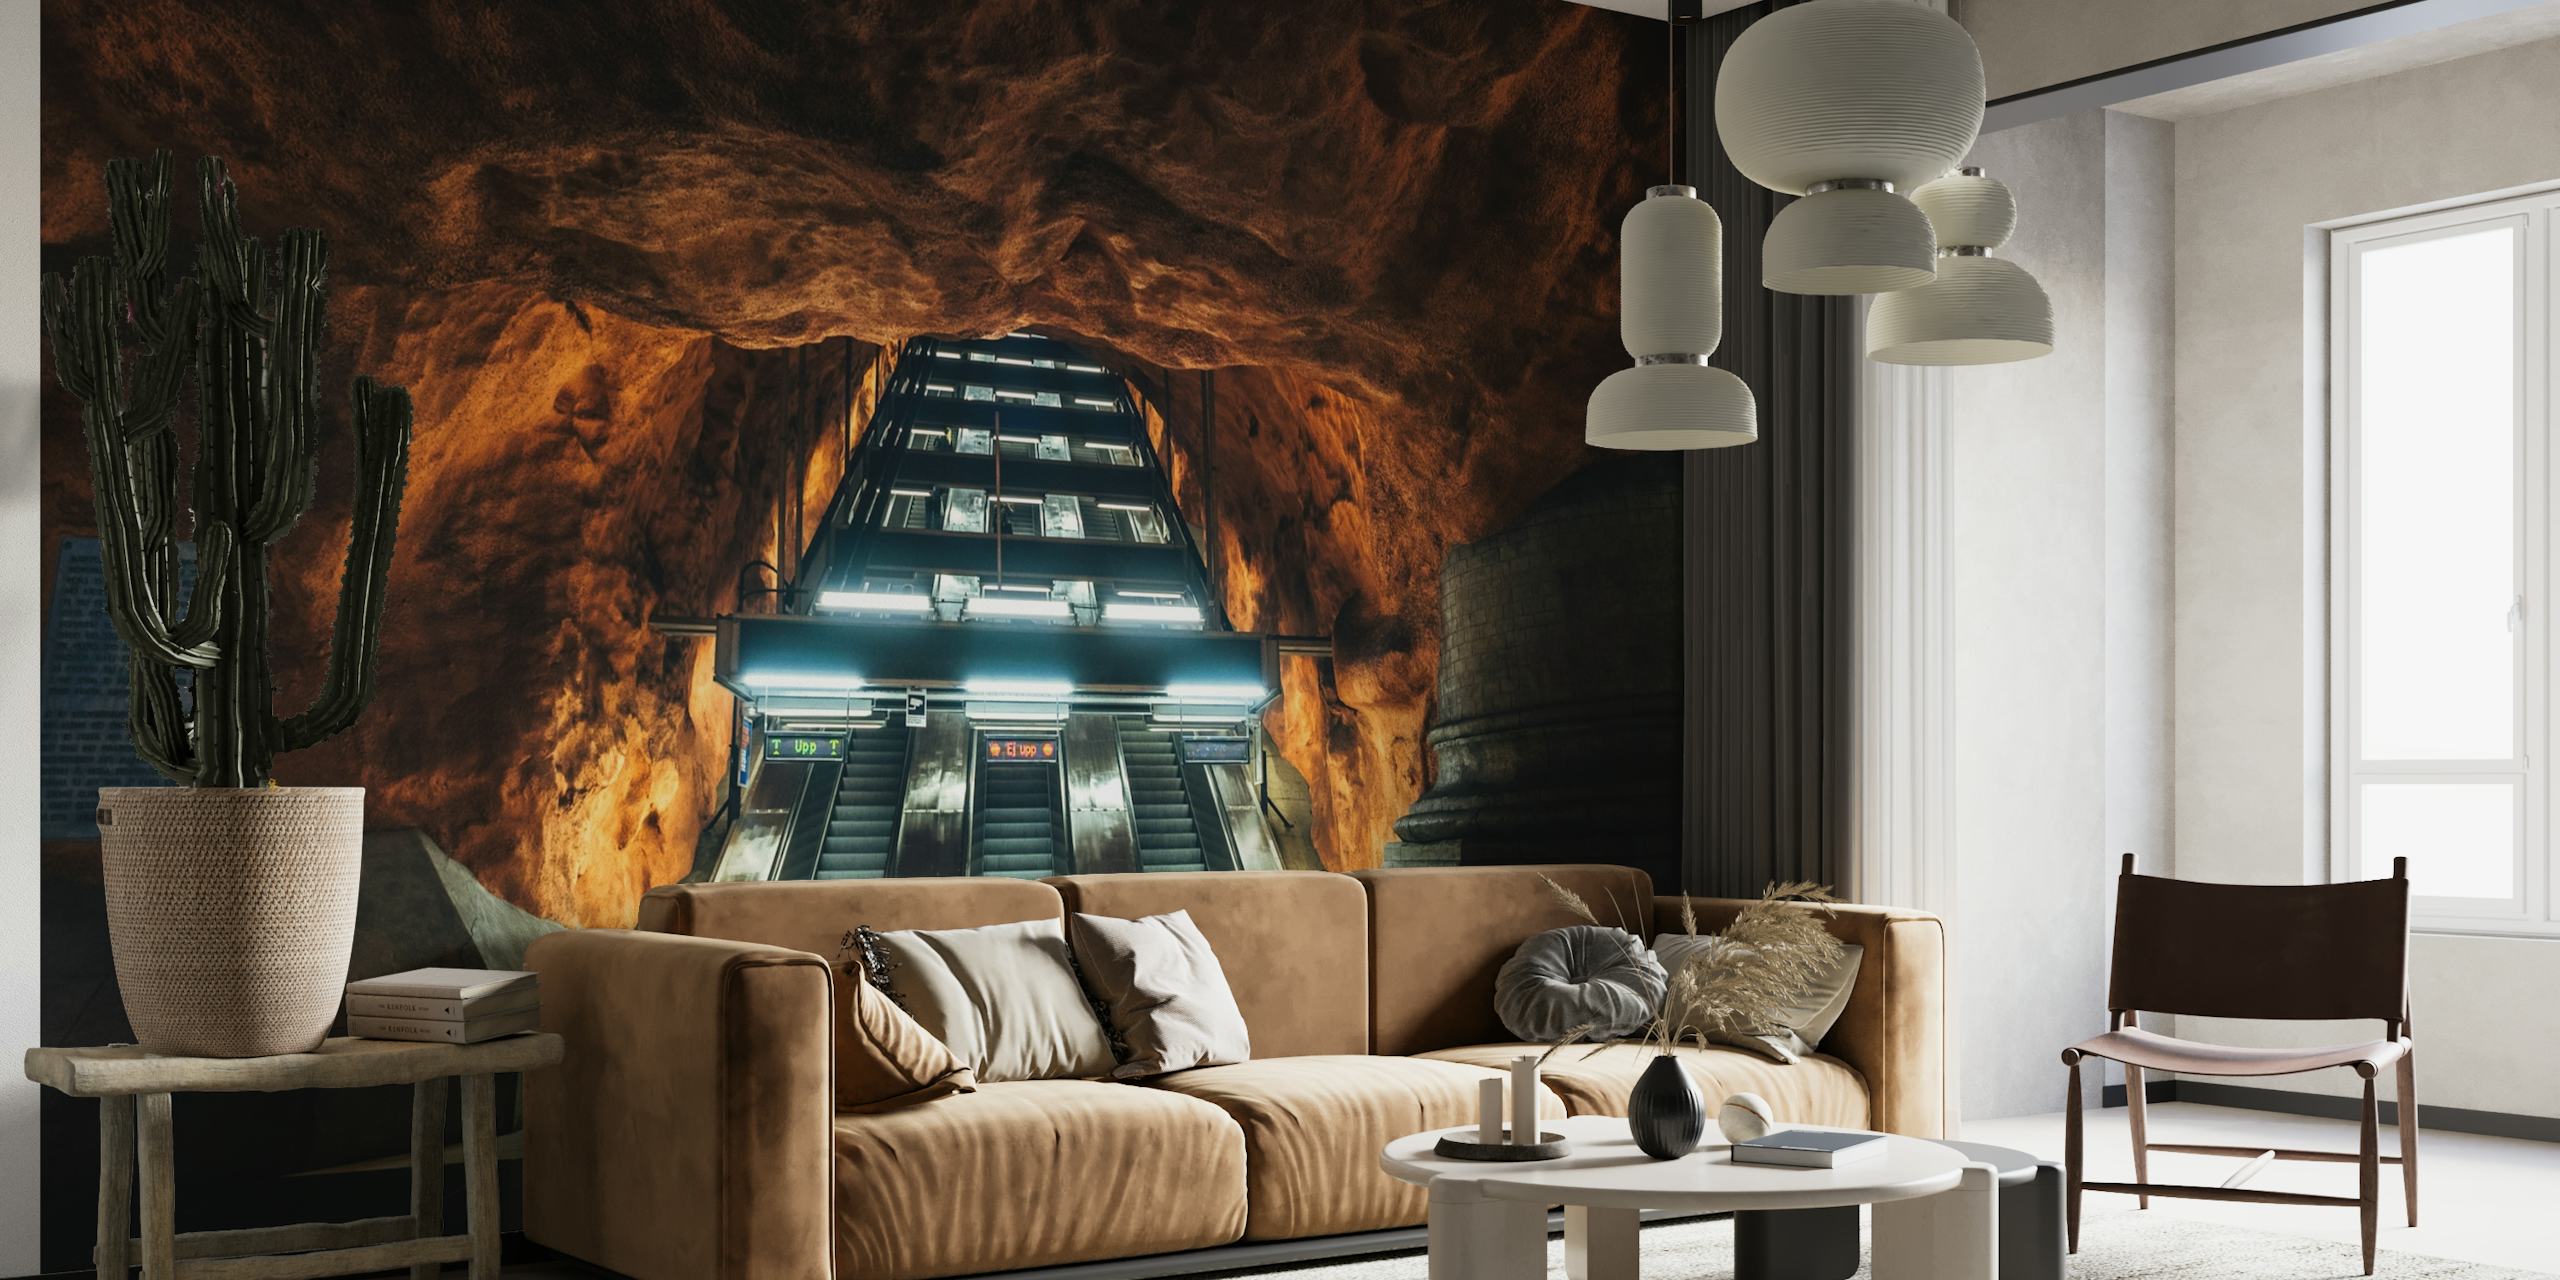 STHLM Underground wall mural showing a Stockholm metro station with atmospheric lighting and exposed rock.